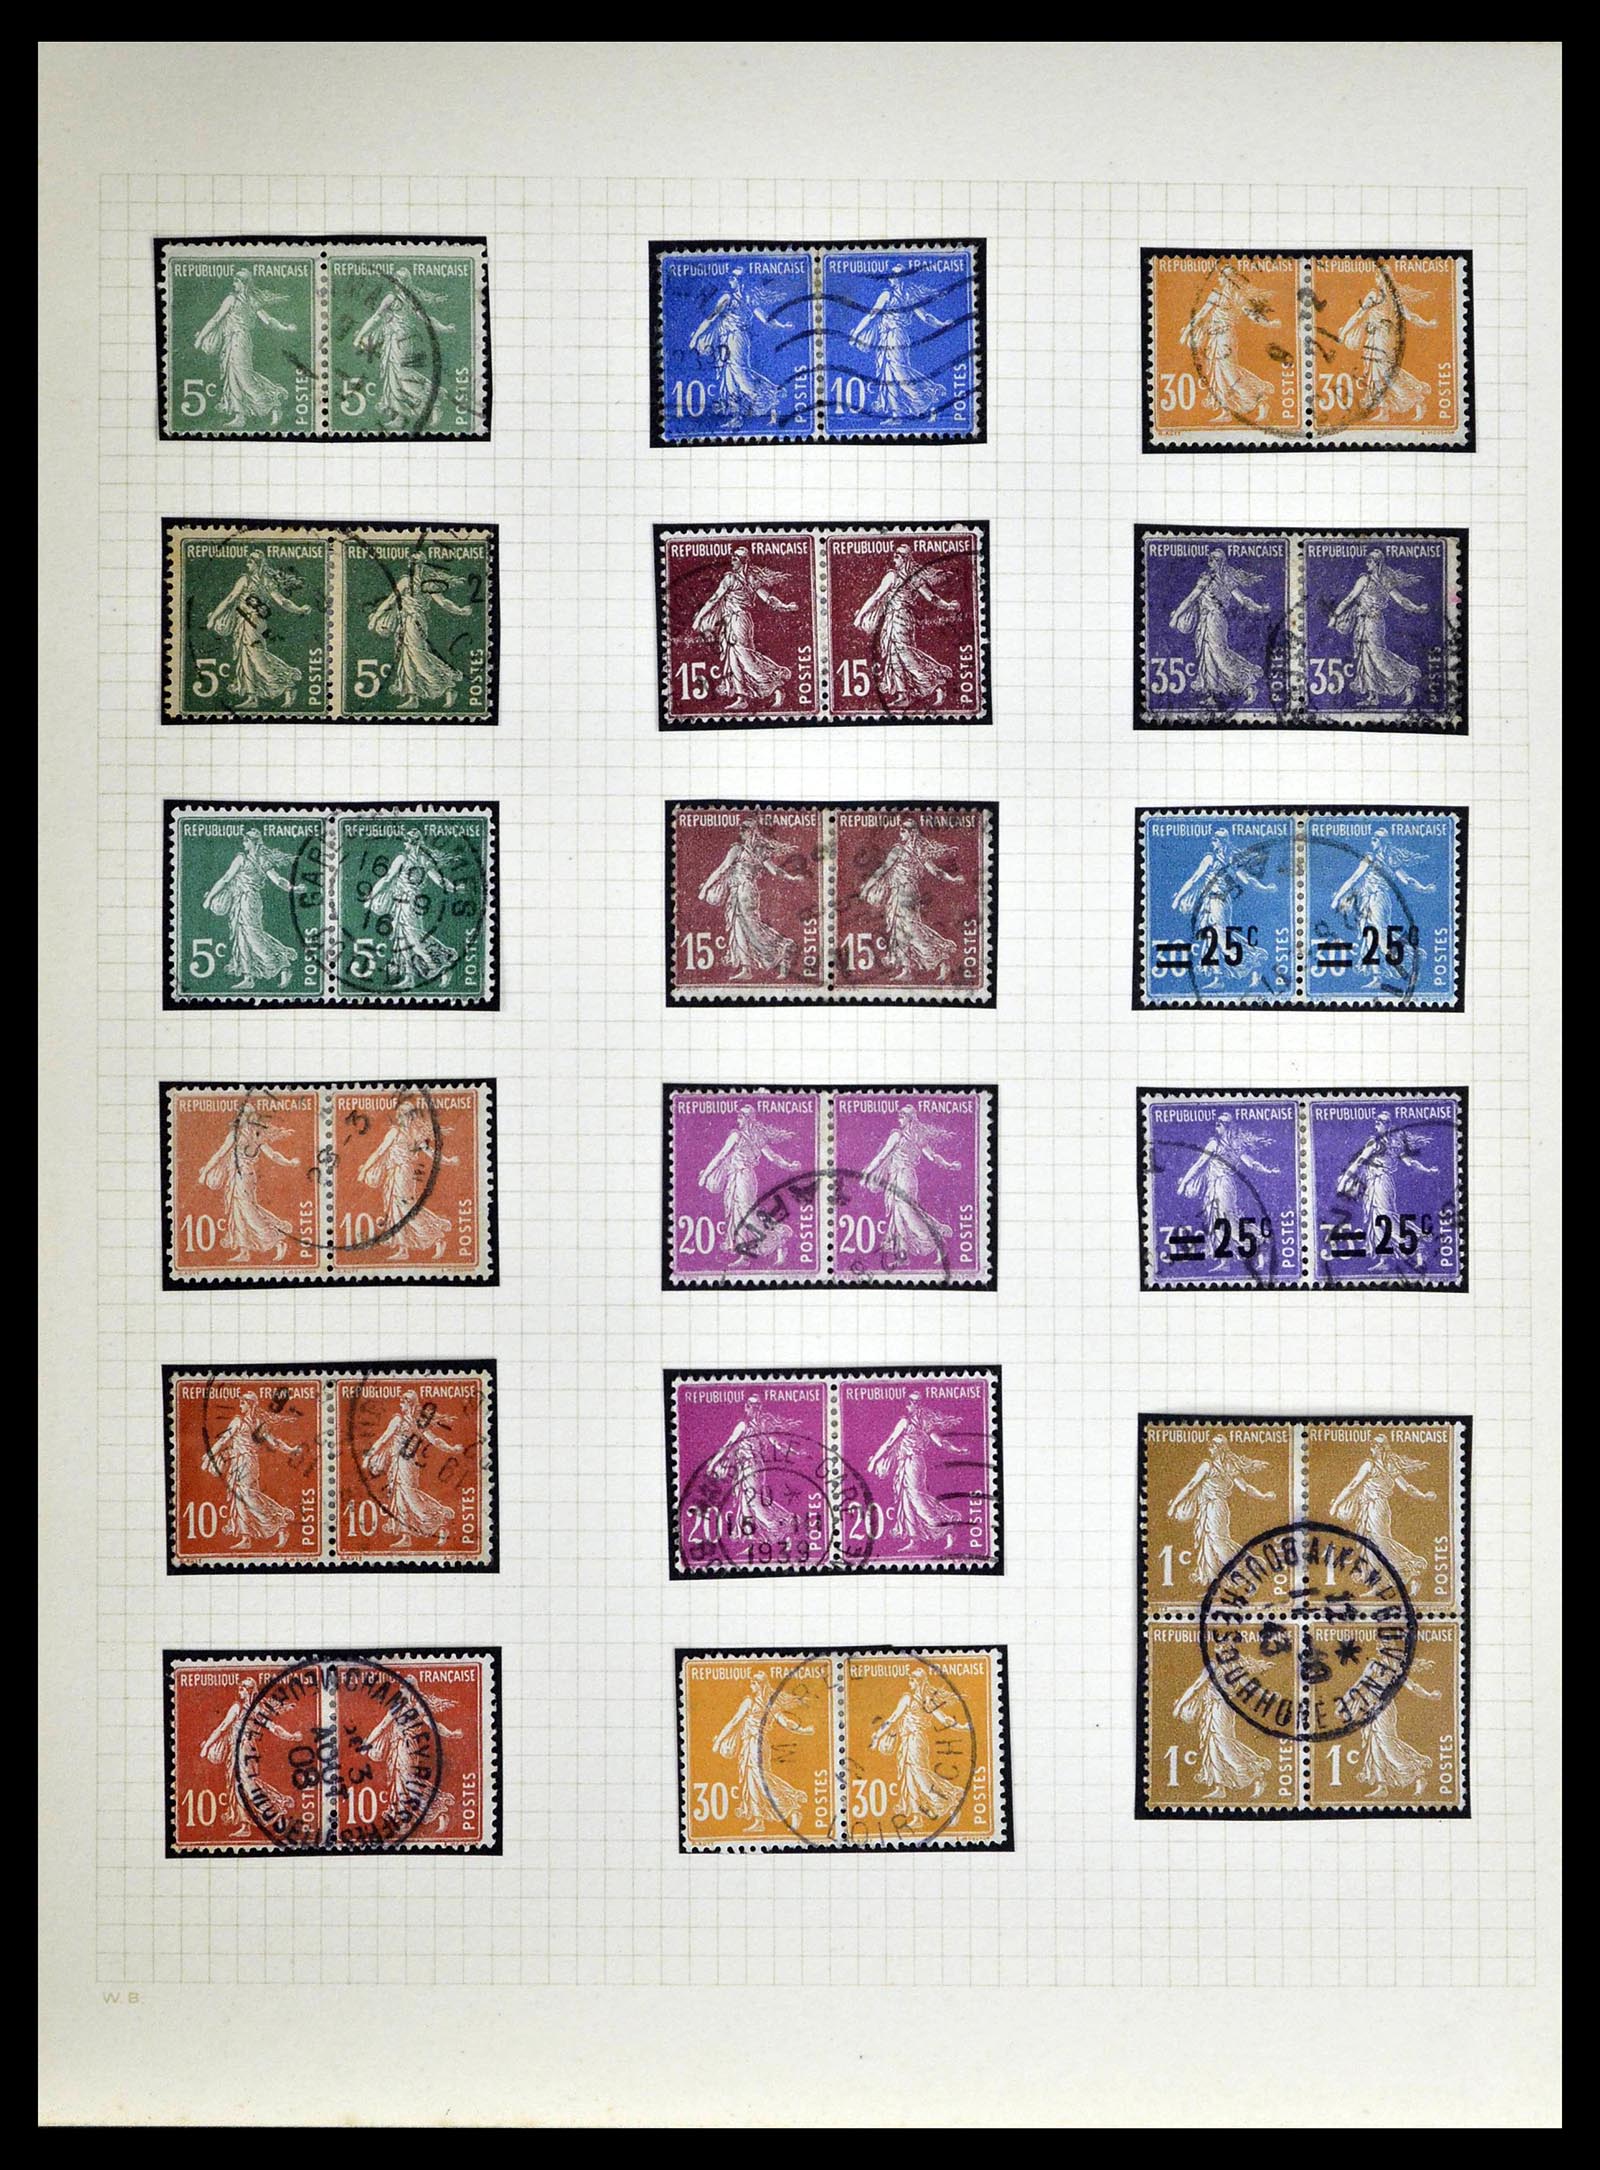 39329 0058 - Stamp collection 39329 France Semeuse.